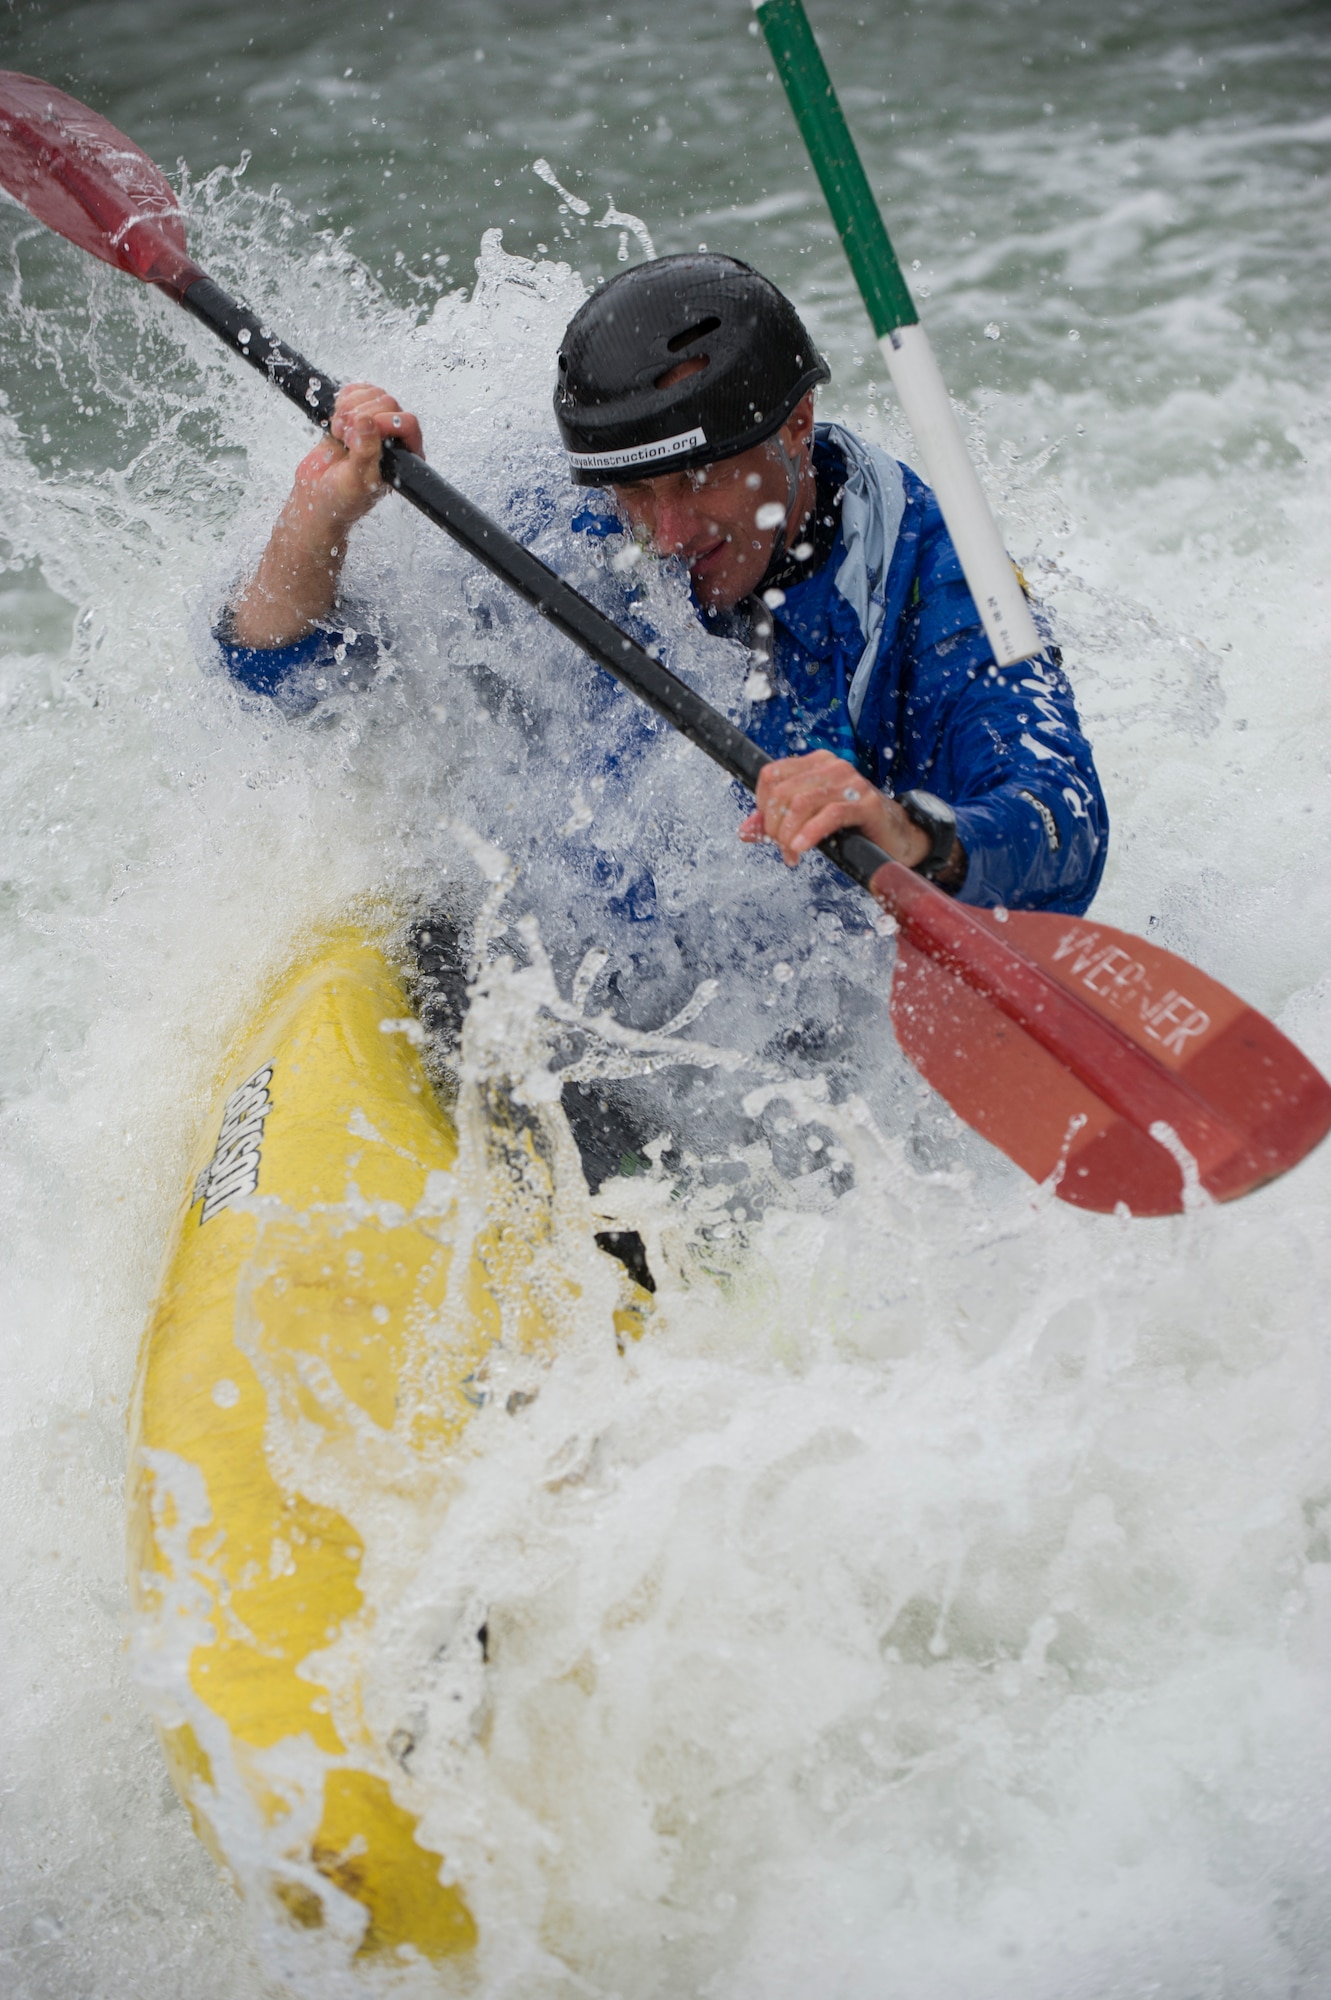 SAN MARCOS, Texas –- Ben Kvanli, former Olympian and current kayaking instructor with the Red River Racing Team, surfs through the rapids in his kayak here Feb. 19. Kvanli spent nearly his whole life kayaking in the Texas region, and competed in the white-water slalom event at the 1996 Atlanta Olympics. He now manages the Red River Racing Team and supports a group of instructors that aims to help developing paddlers in the sport.  Kvanli was the primary instructor guiding Airmen a spouse and a civilian from the Holloman Outdoor Wingman Program on their kayaking trip to San Marcos. (U.S. Air Force photo by Airman 1st Class Daniel E. Liddicoet/Released)